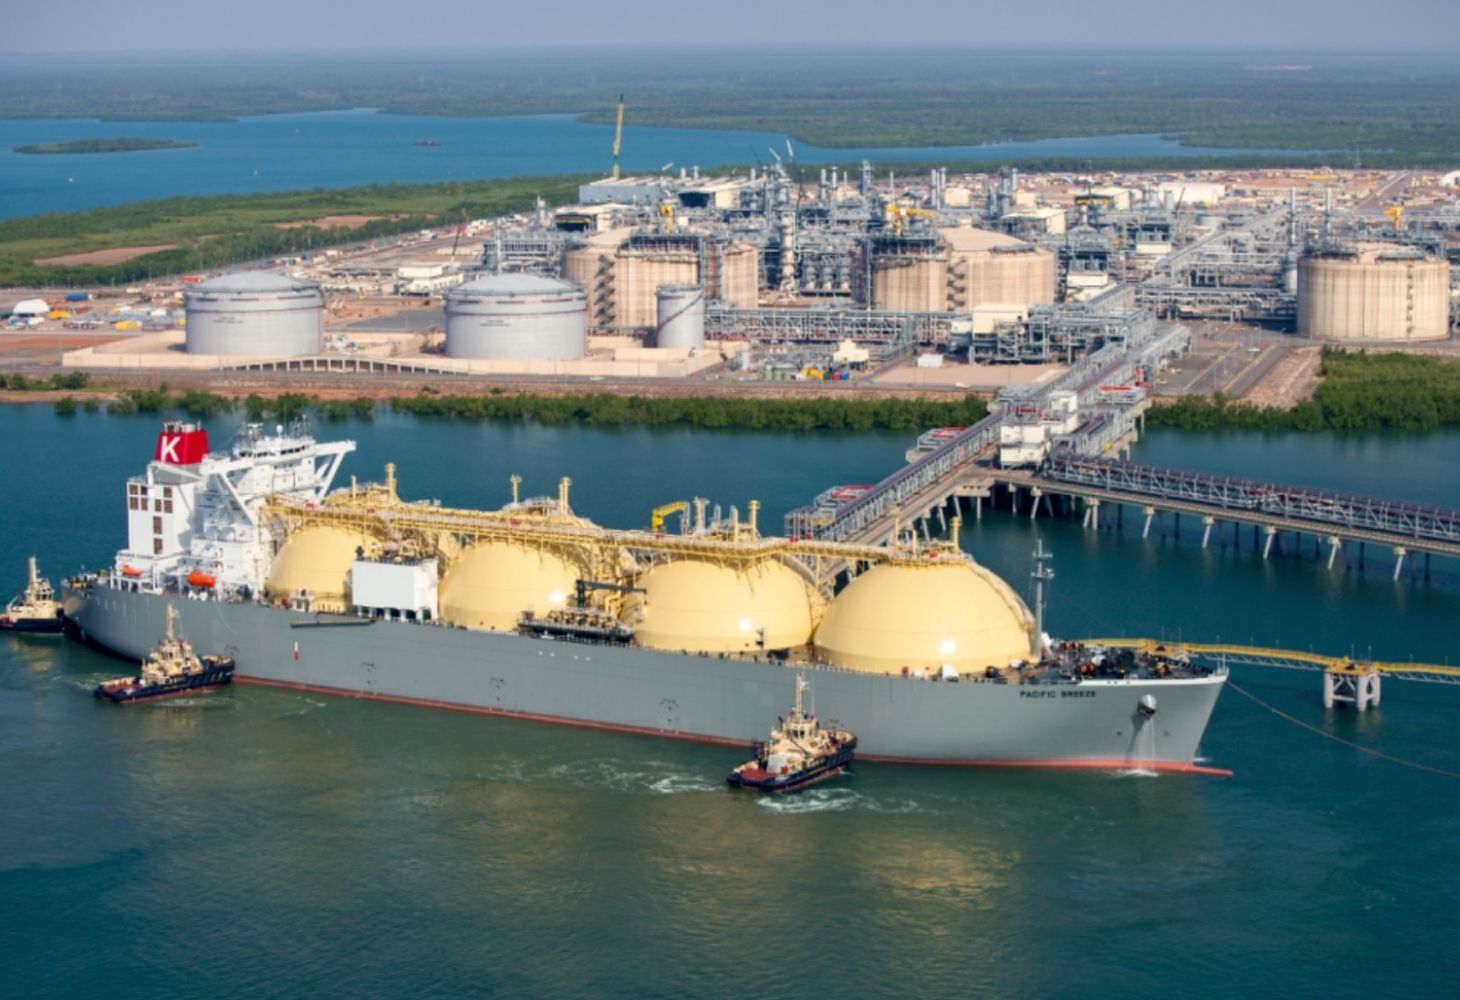 Total Ichthys liquefied natural gas project in Australia